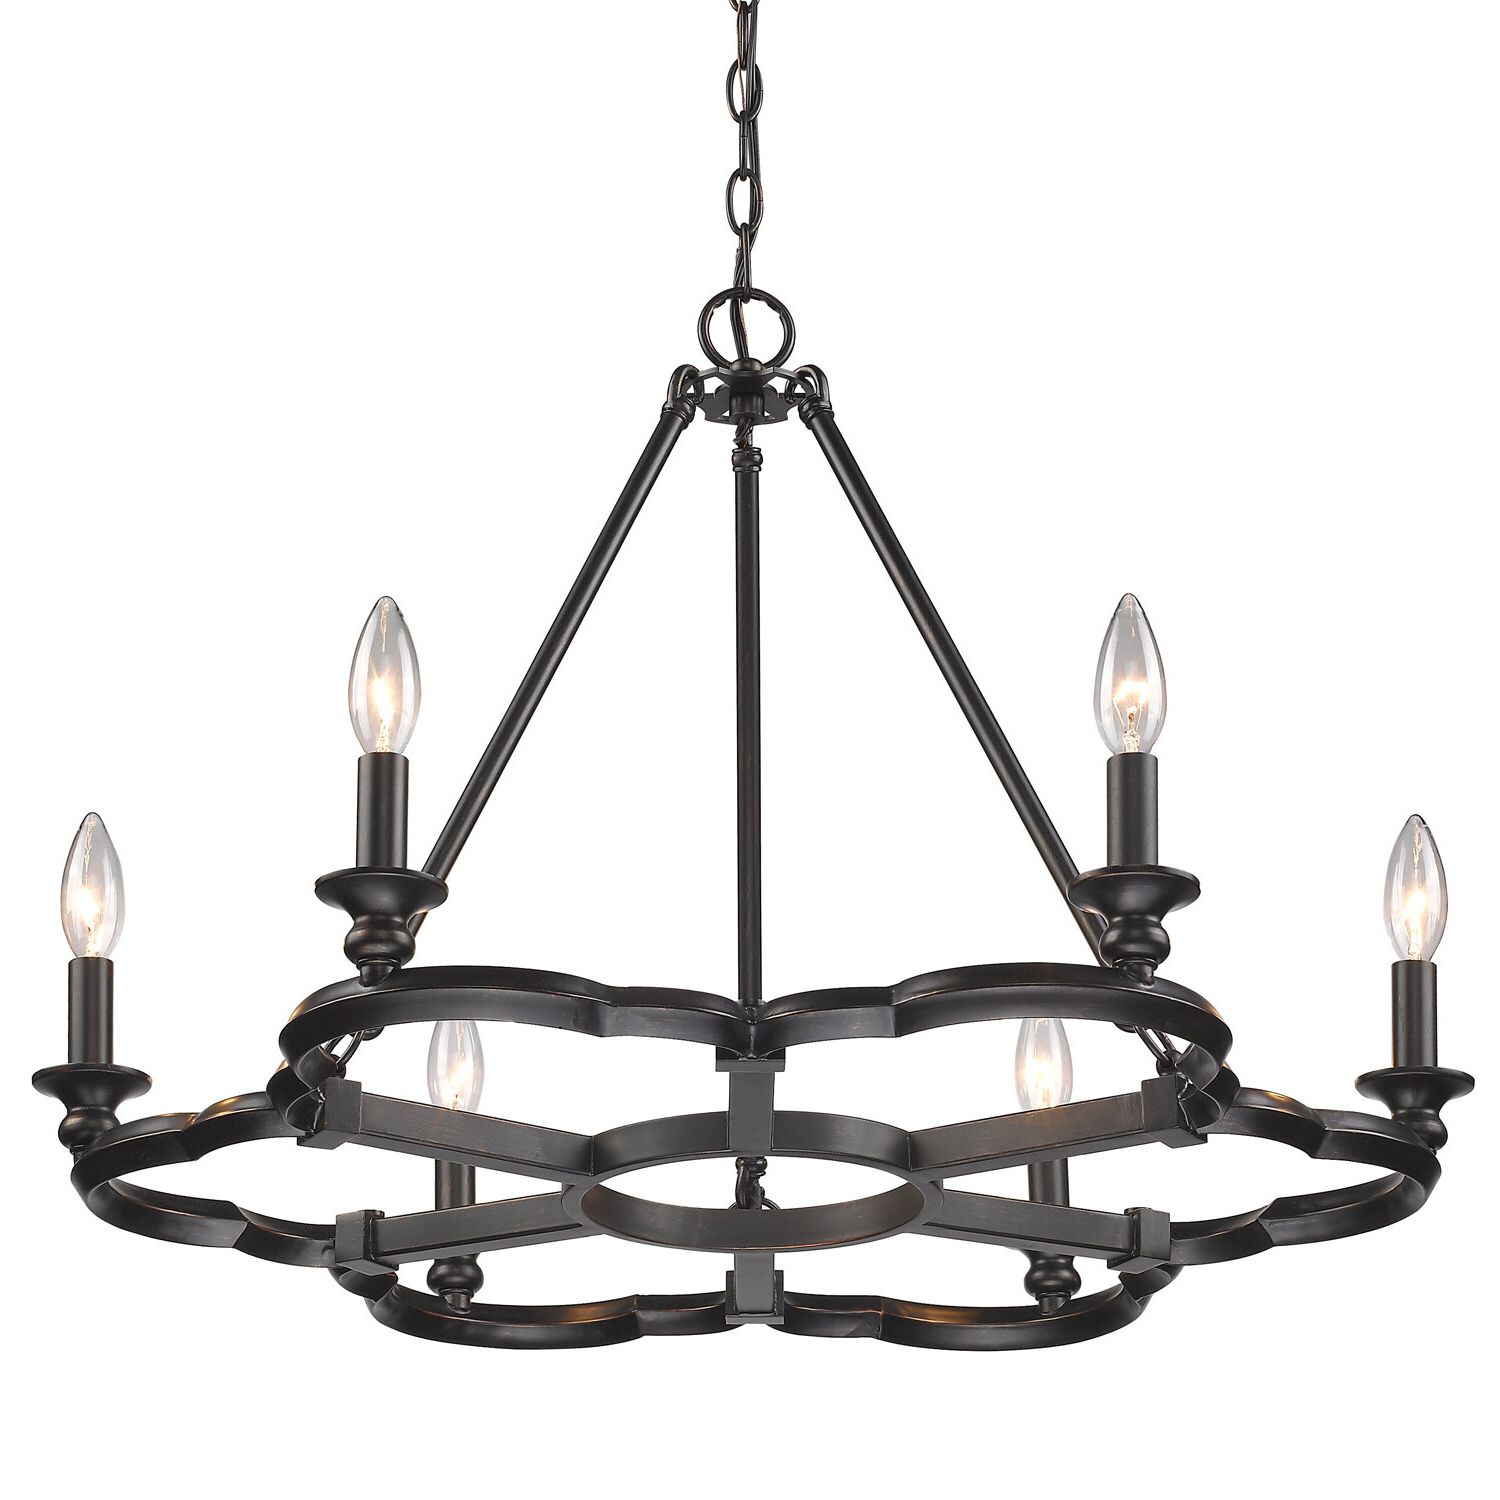 2020 Kenna 5 Light Empire Chandeliers Intended For Stephania 6 Light Candle Style Chandelier (View 15 of 20)